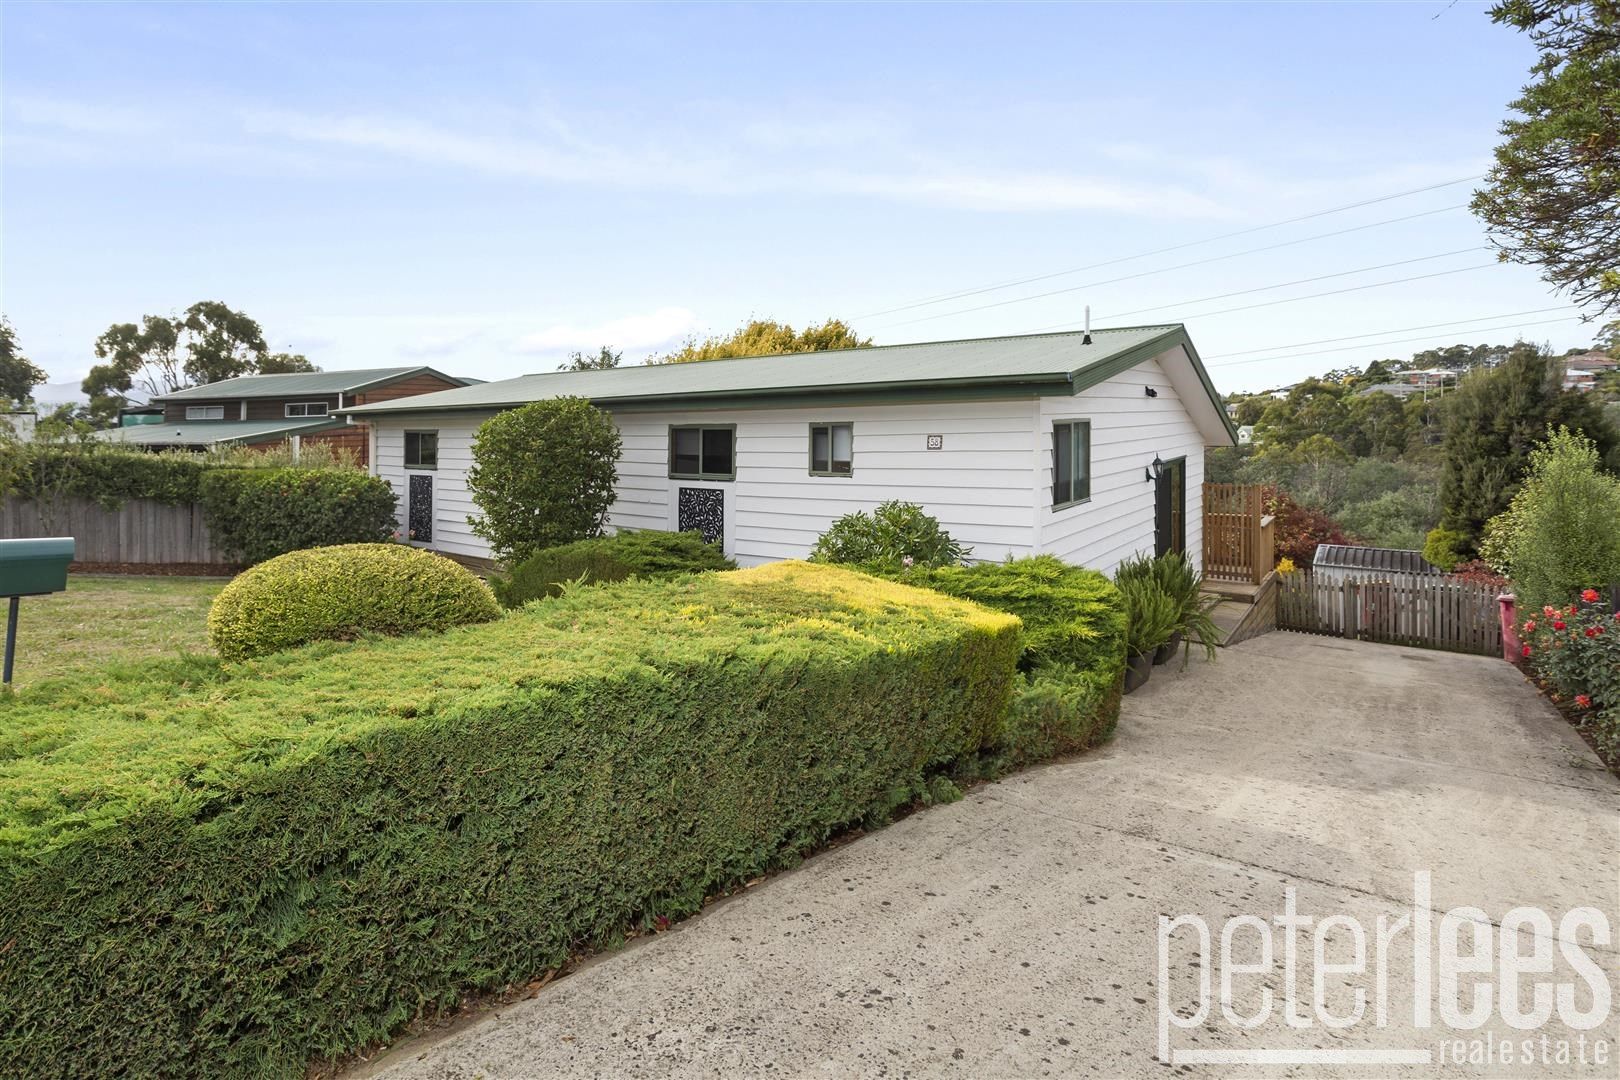 3 bedrooms House in 58 Belgrave Parade YOUNGTOWN TAS, 7249